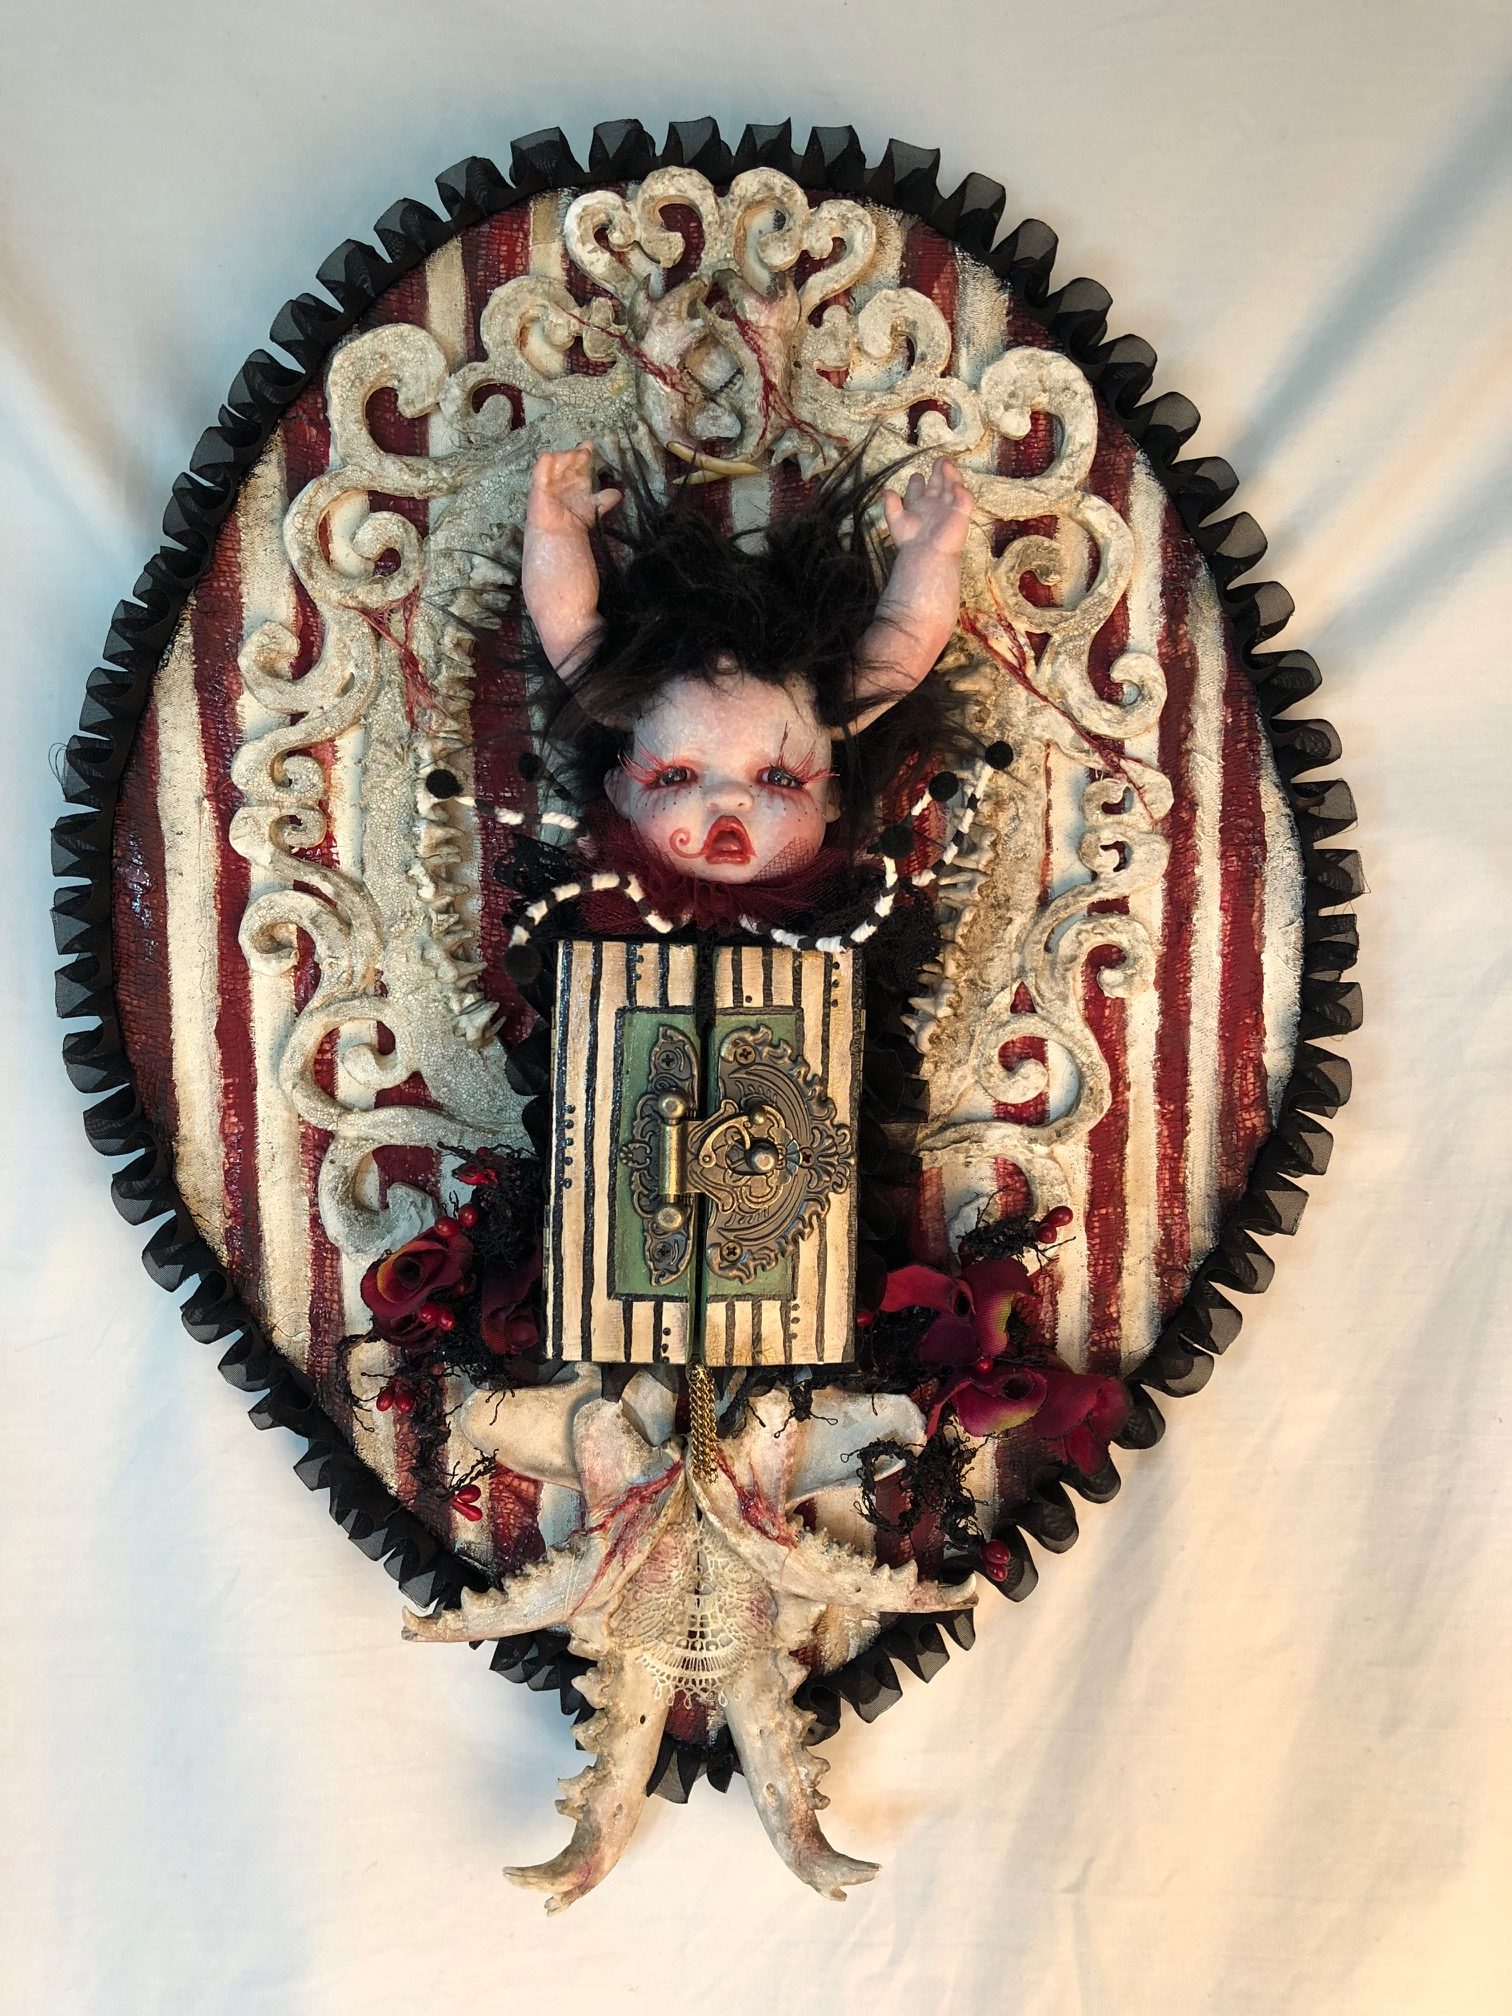 mixed media assemblage wall plaque with gothic repaint porcelain doll head arms for horns, closed striped cabinet, jawbones on striped textile covered wooden board